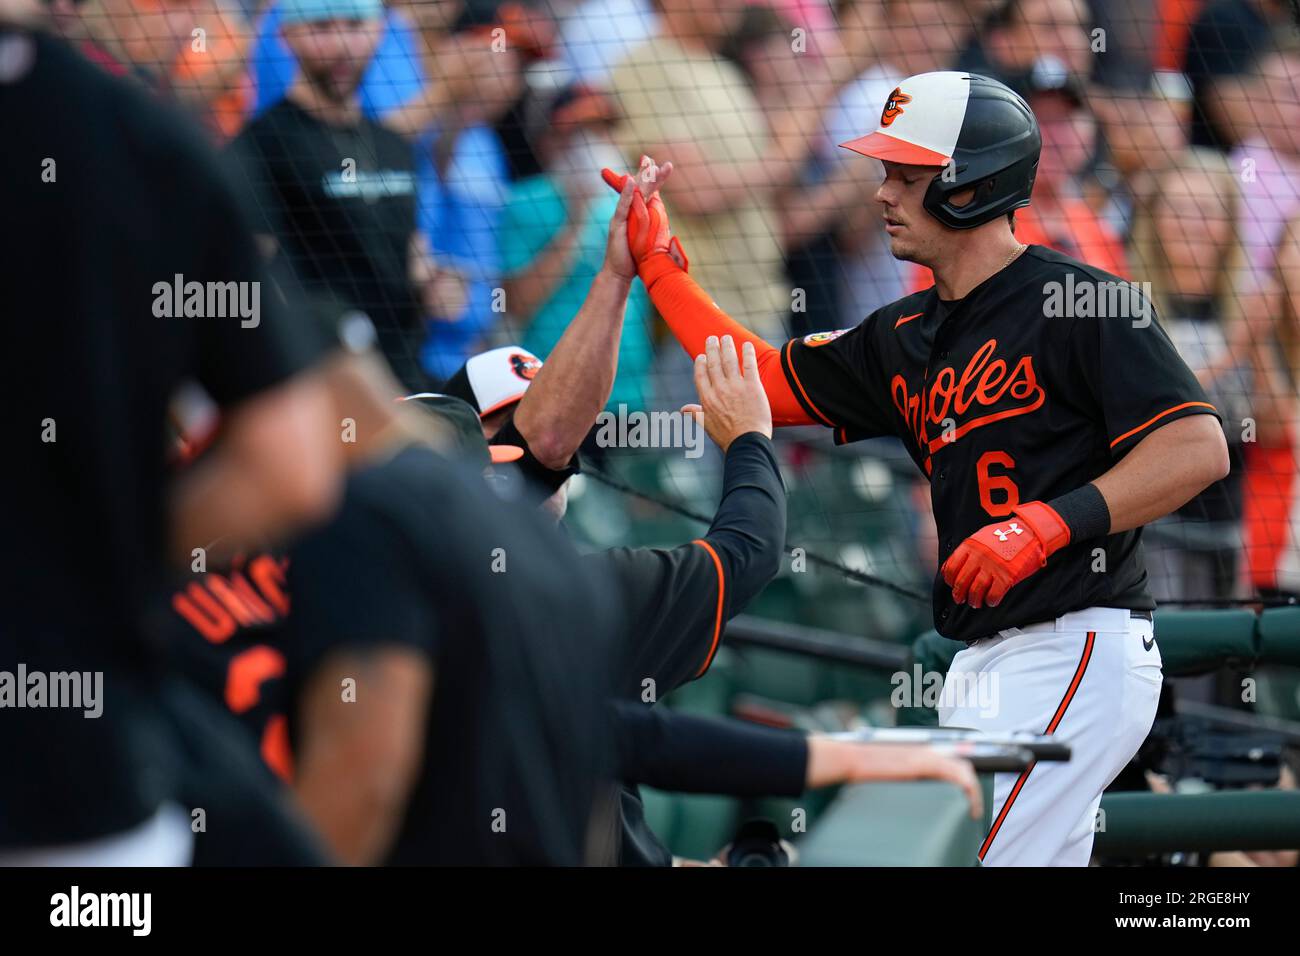 Ryan Mountcastle of the Baltimore Orioles laughs after swinging at